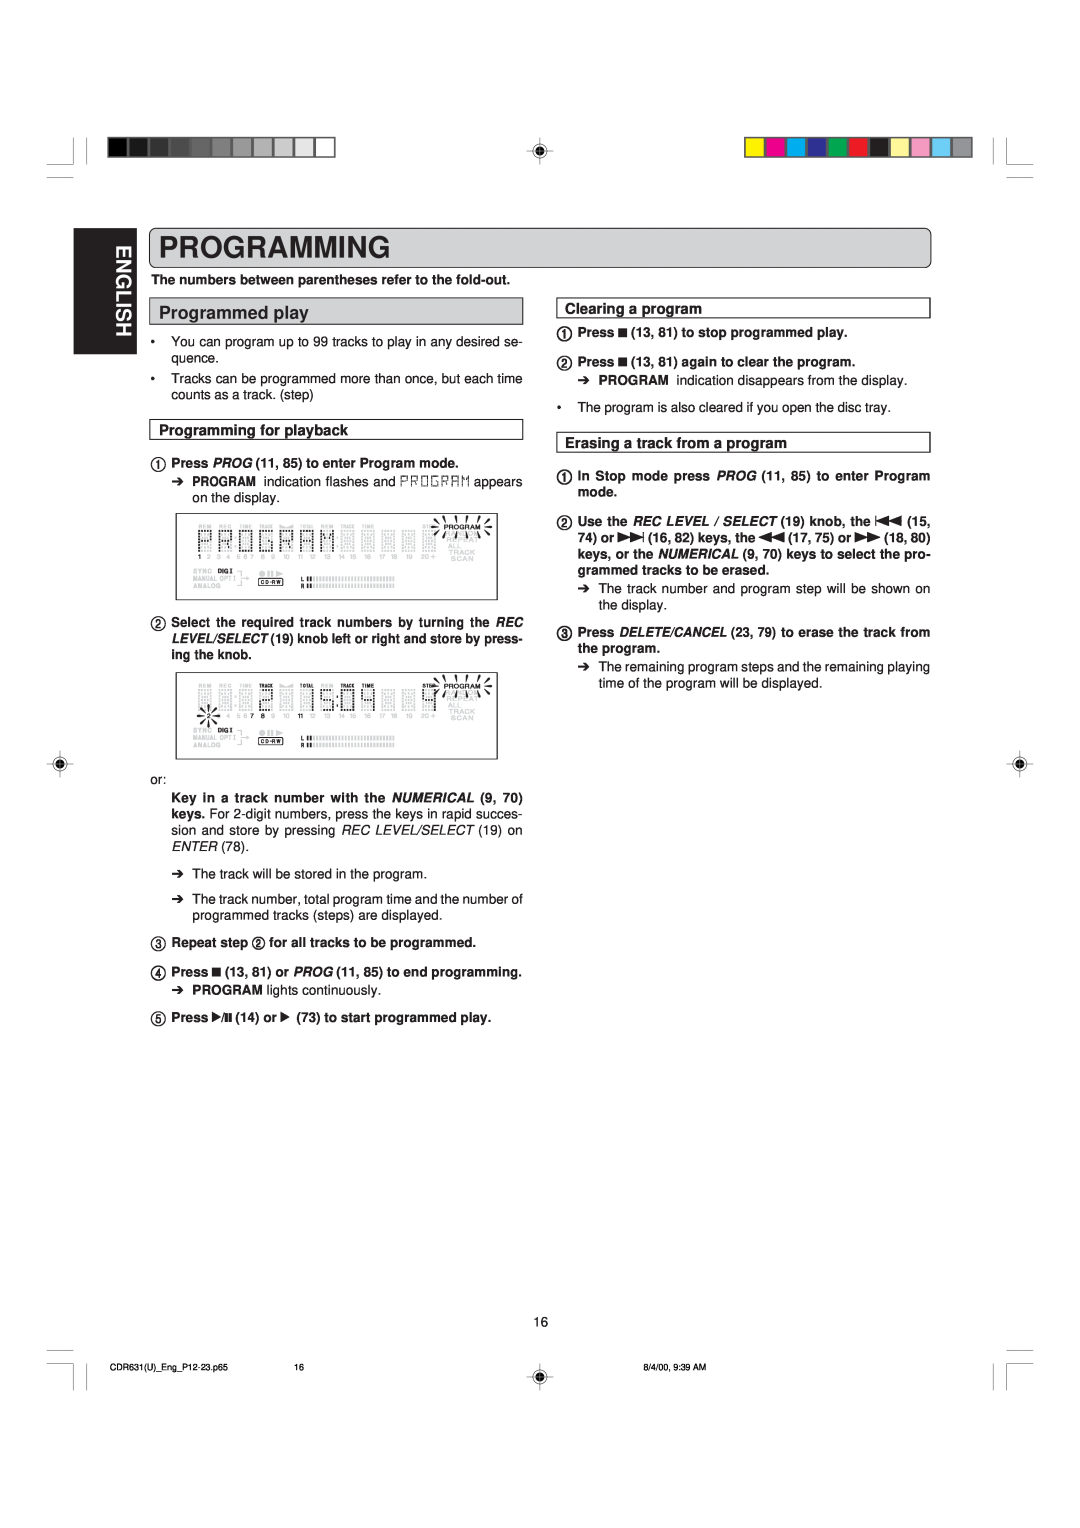 Marantz CDR631 manual English, Clearing a program, Programming for playback, Erasing a track from a program 